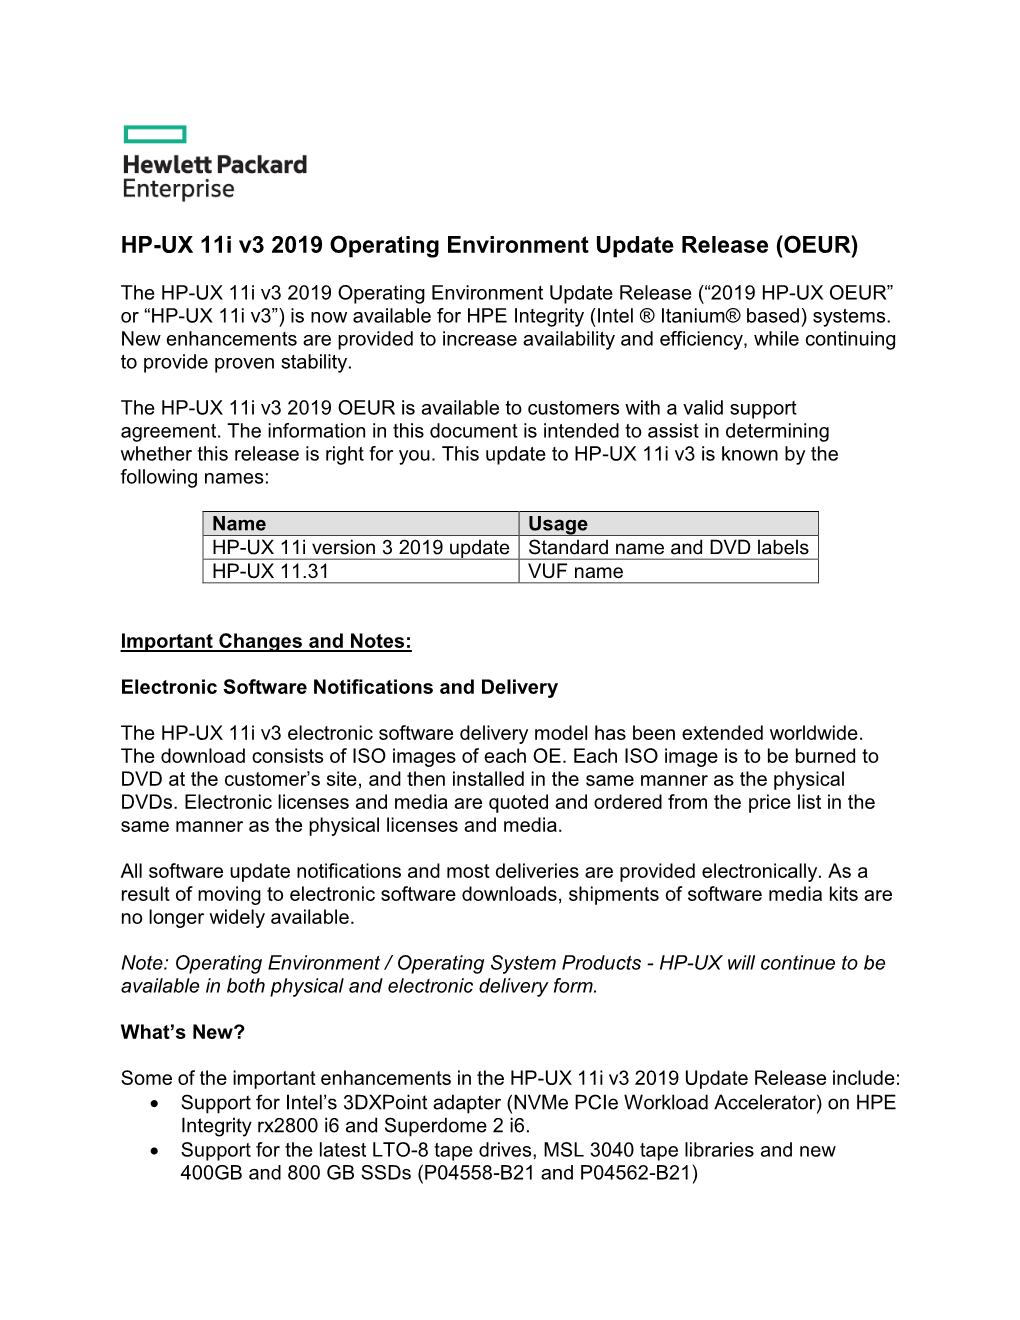 HP-UX 11I V3 2019 Operating Environment Update Release (OEUR)